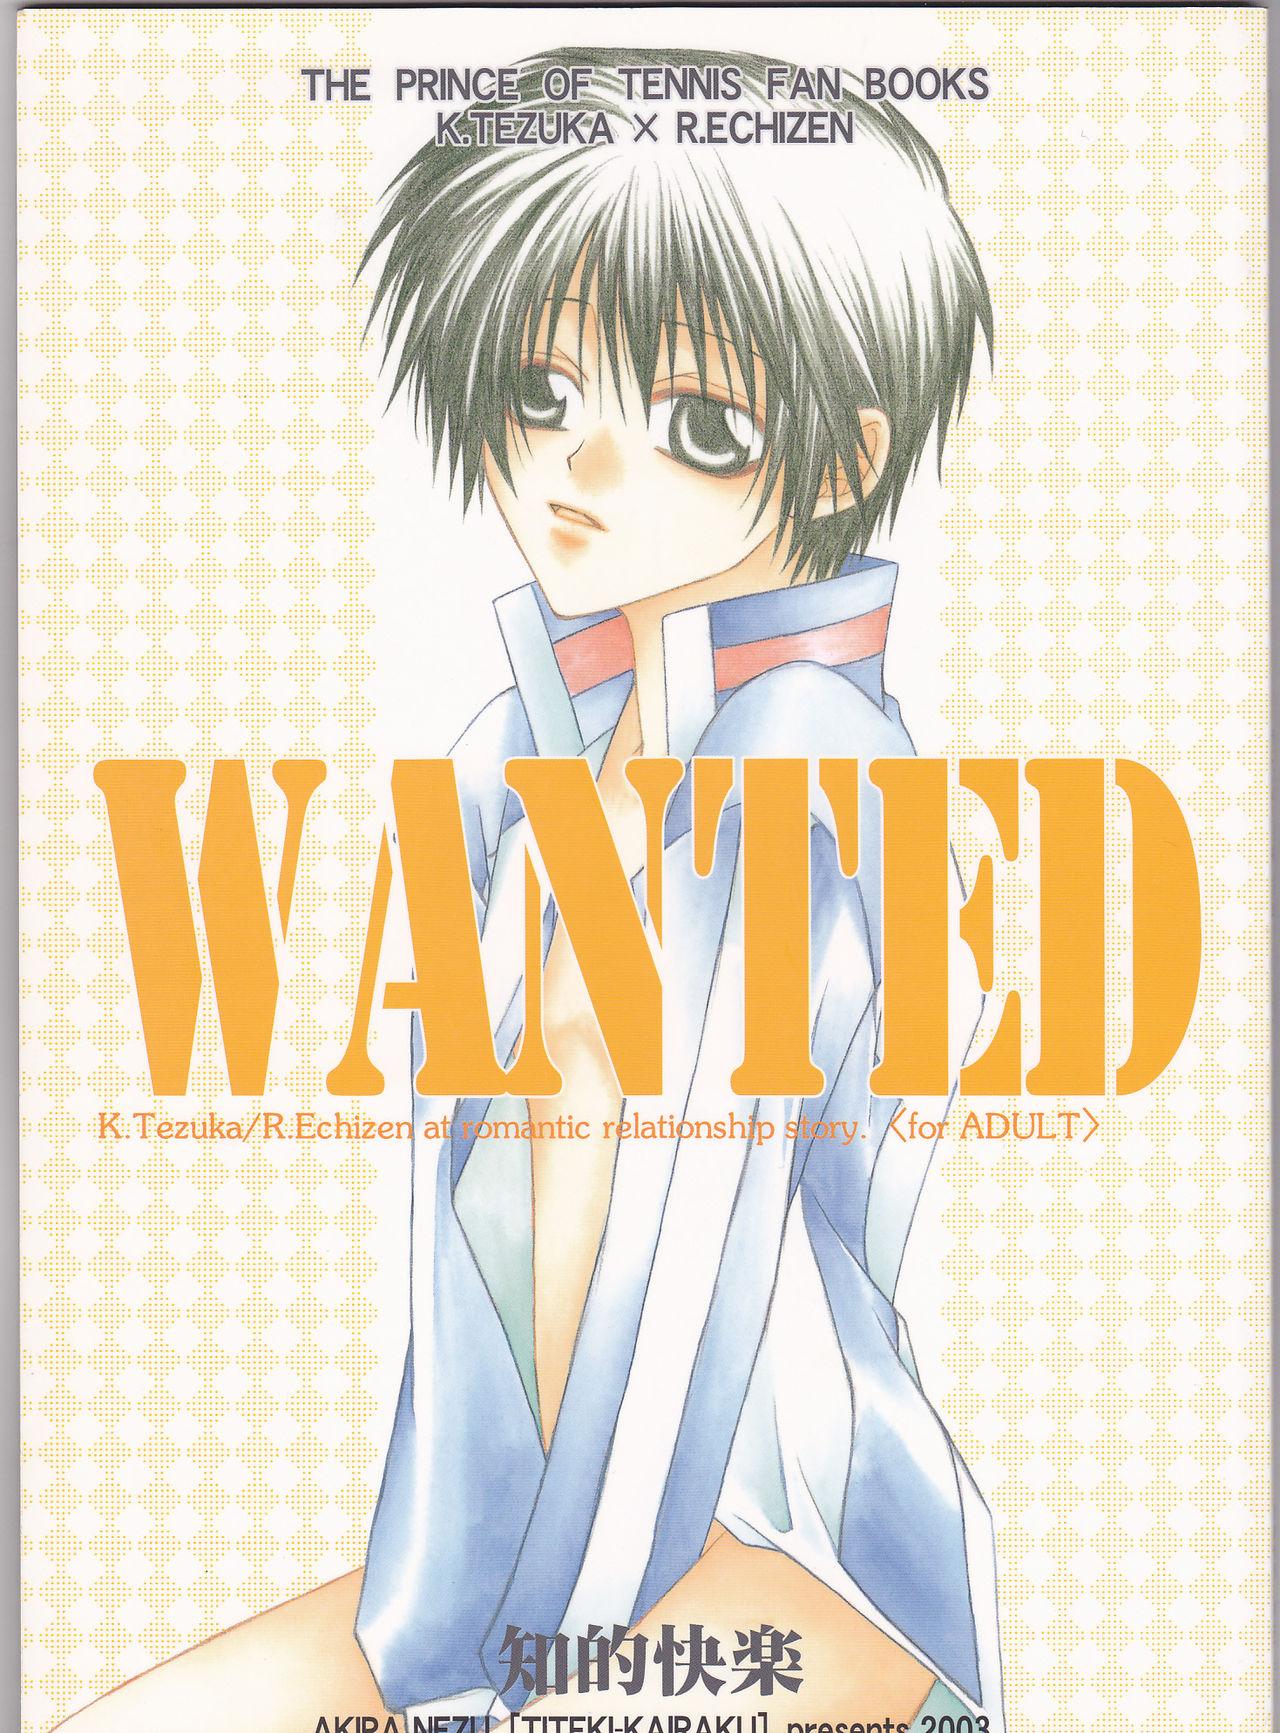 WANTED 0